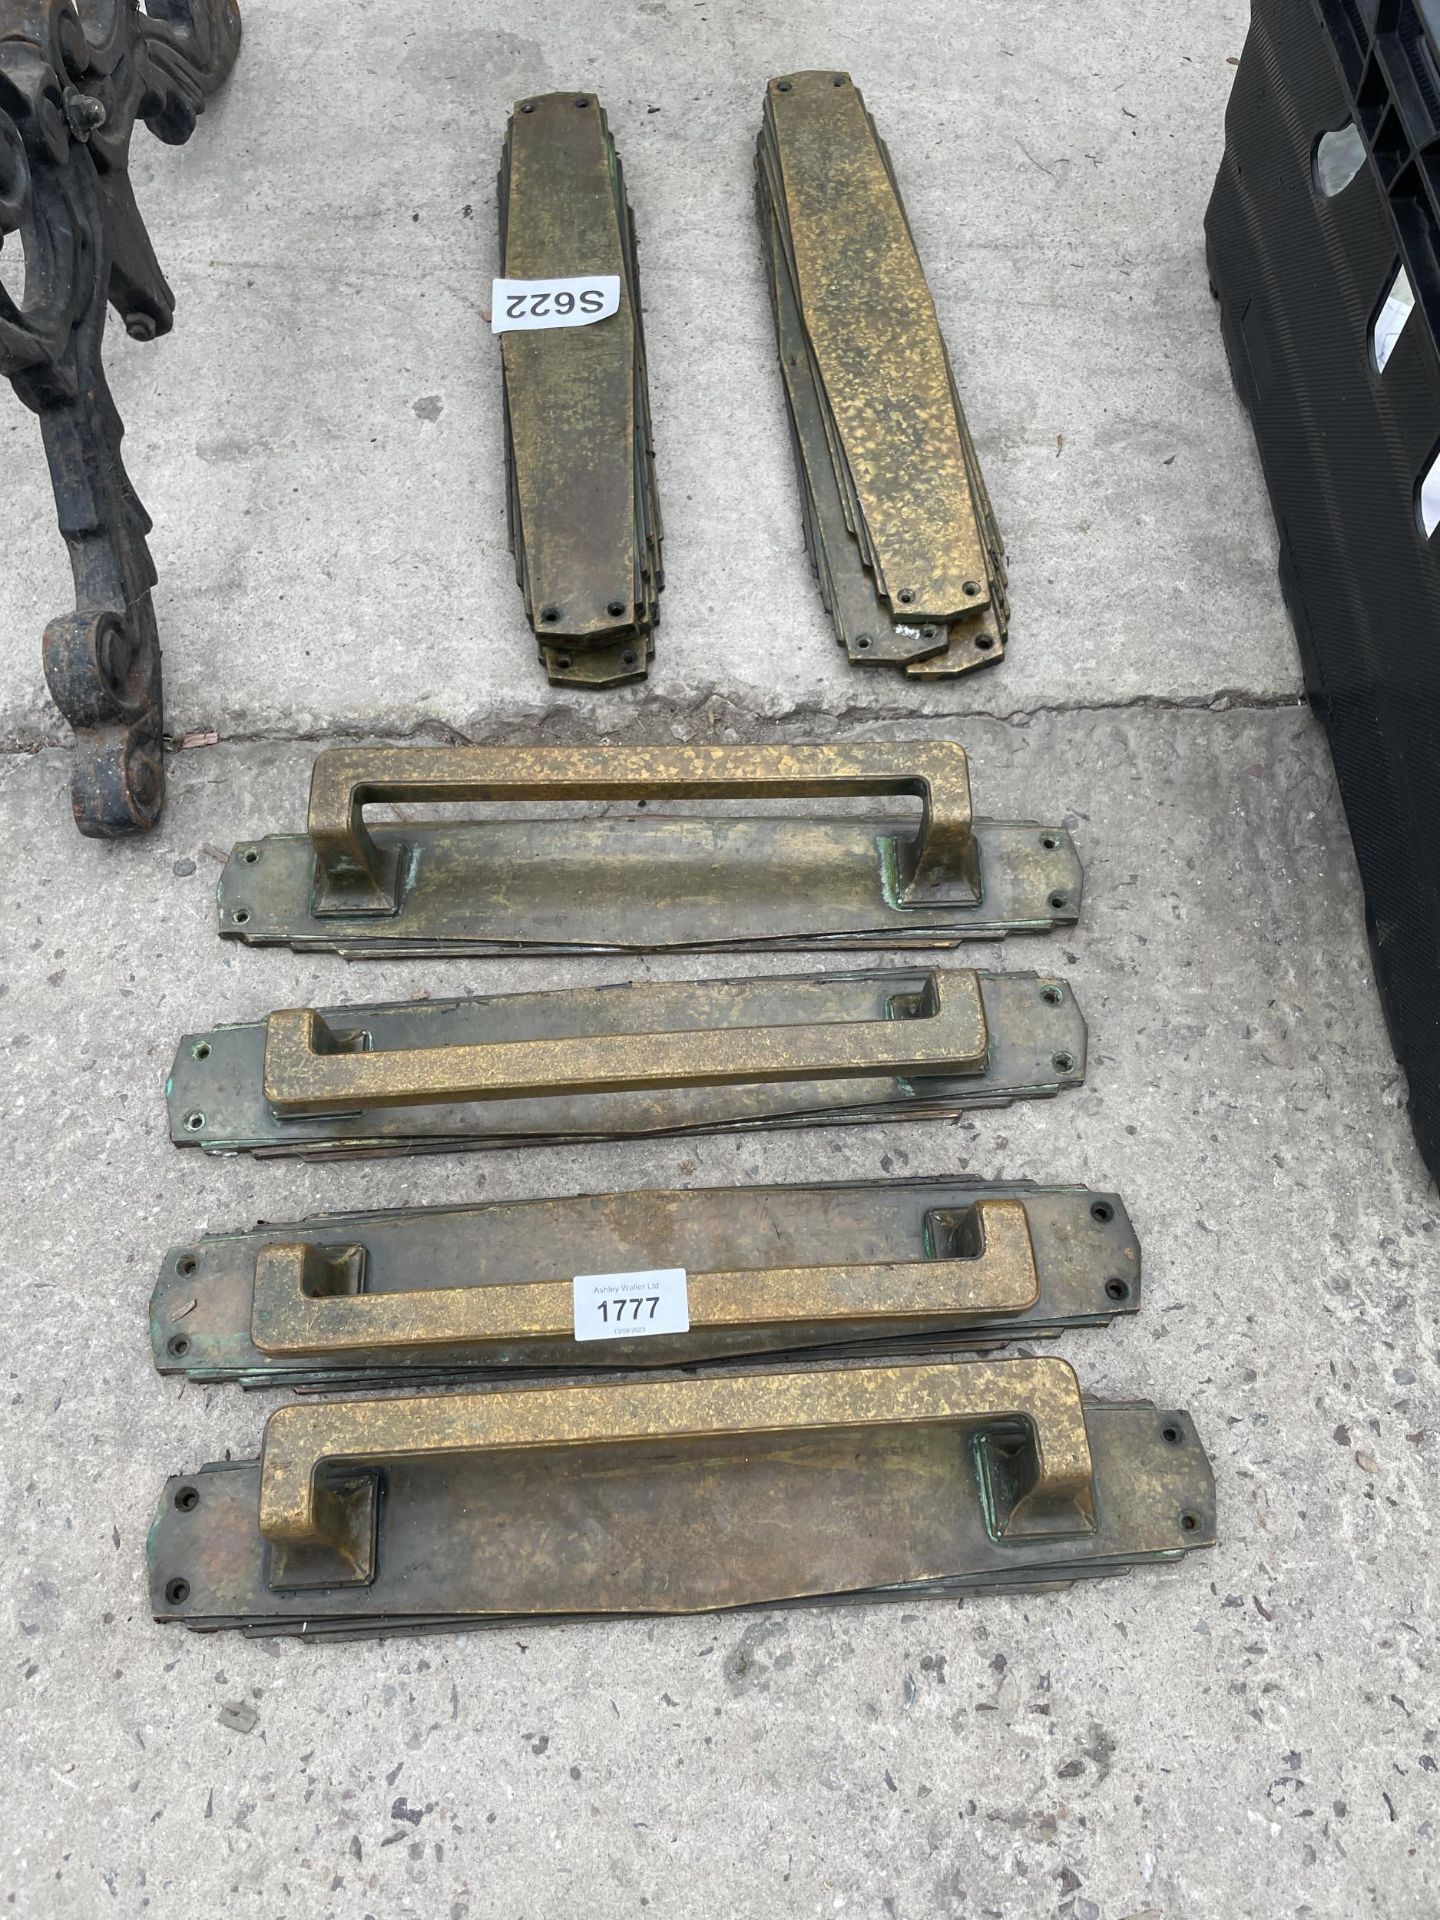 AN ASSORTMENT OF VINTAGE COPPER AND BRASS DOOR HANDLES AND PUSH PLATES